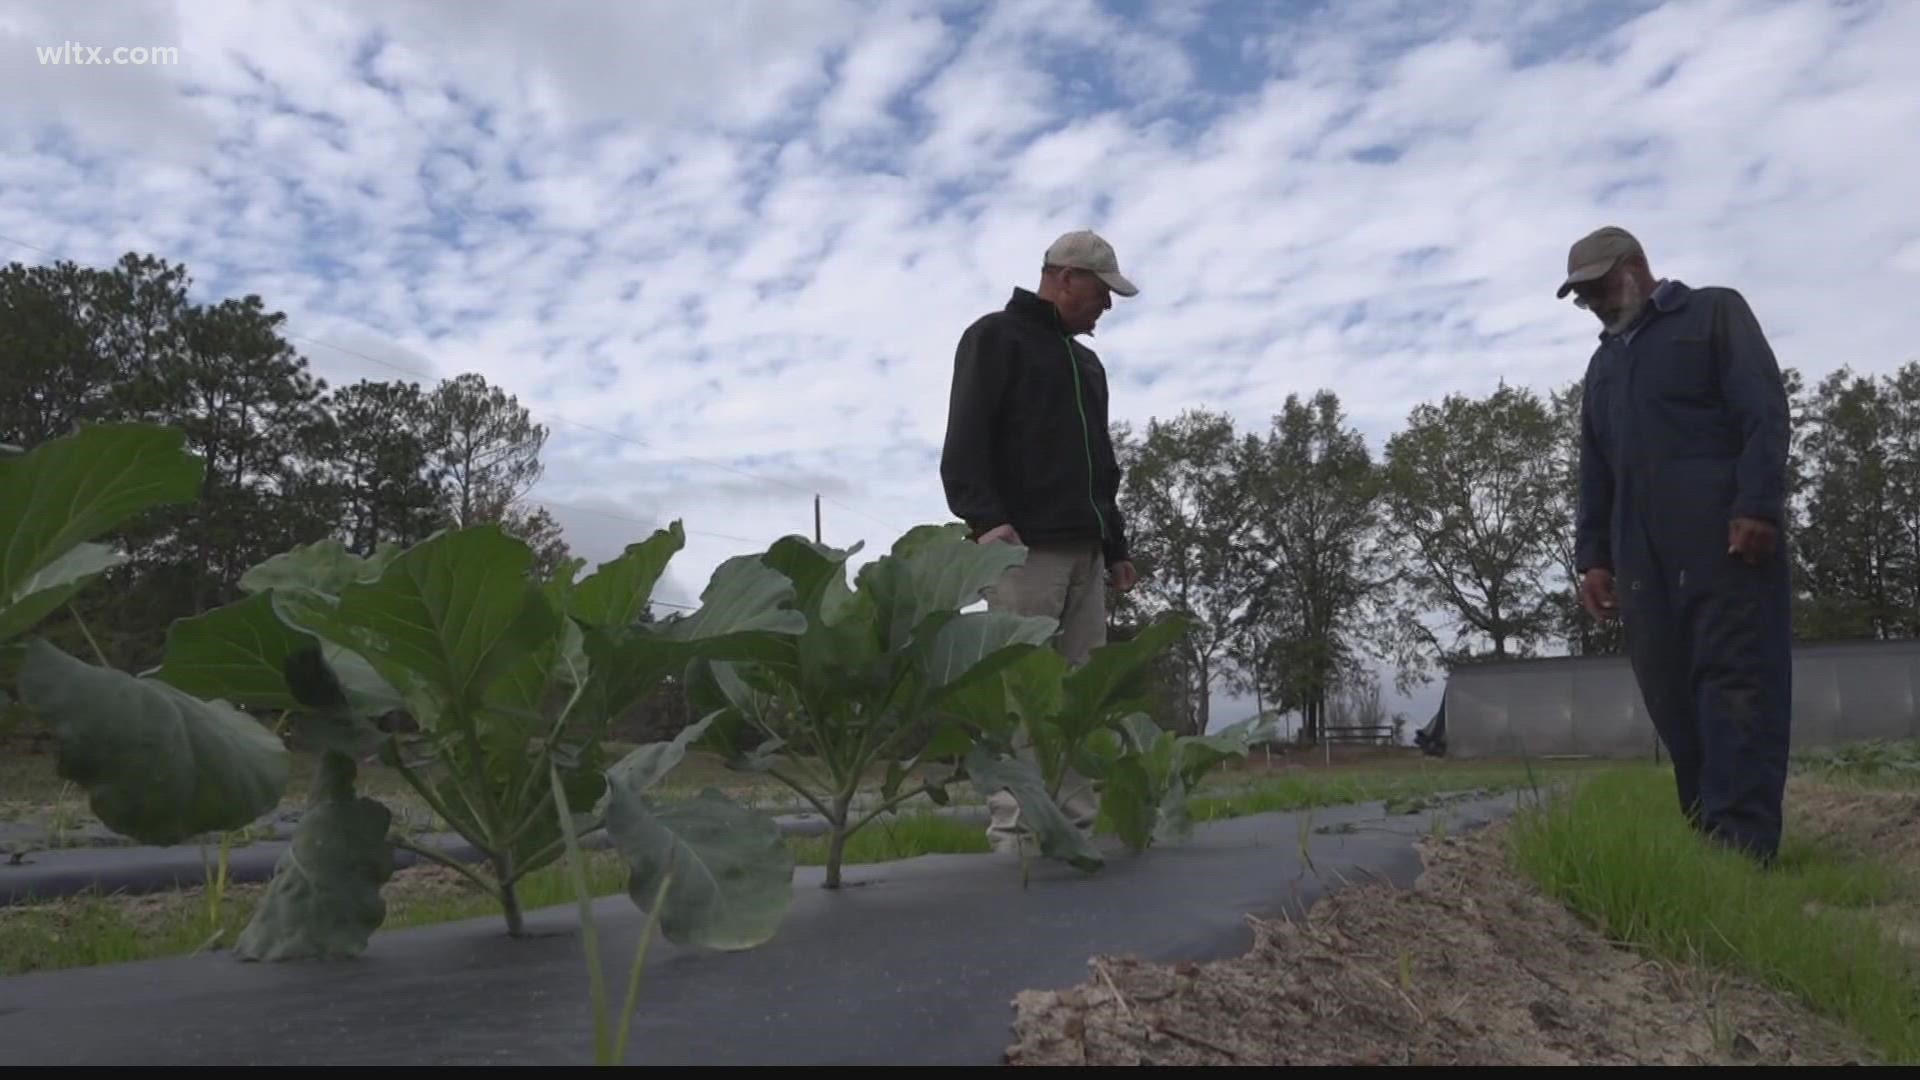 For three years a group of Lexington residents have focused on giving back to their community through a community garden.